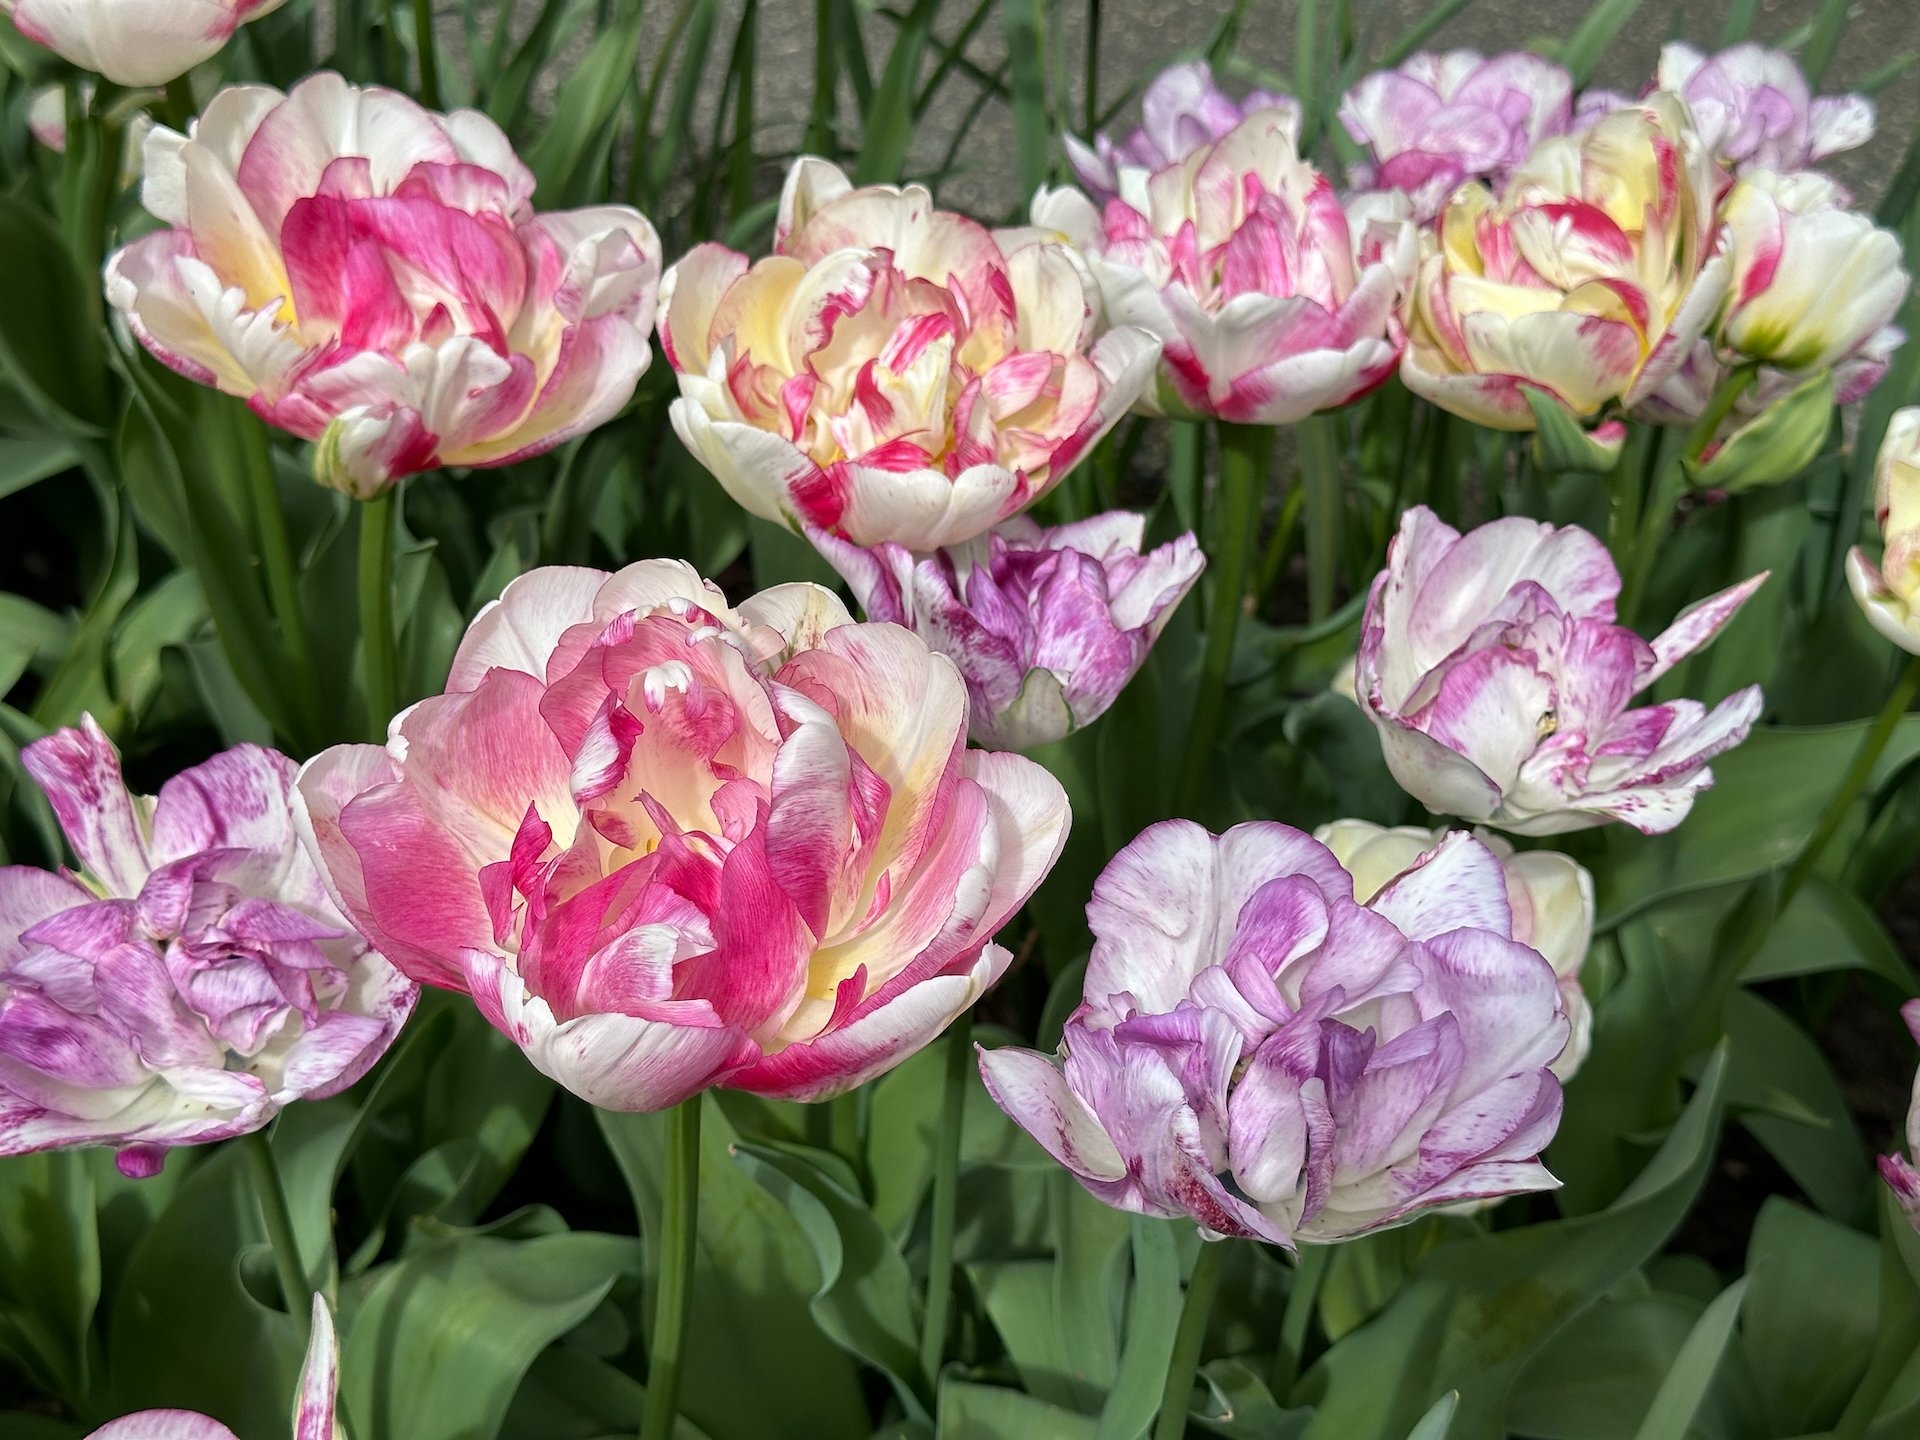  I’m not sure I’ve ever seen tulips in such amazing colours and patterns.  